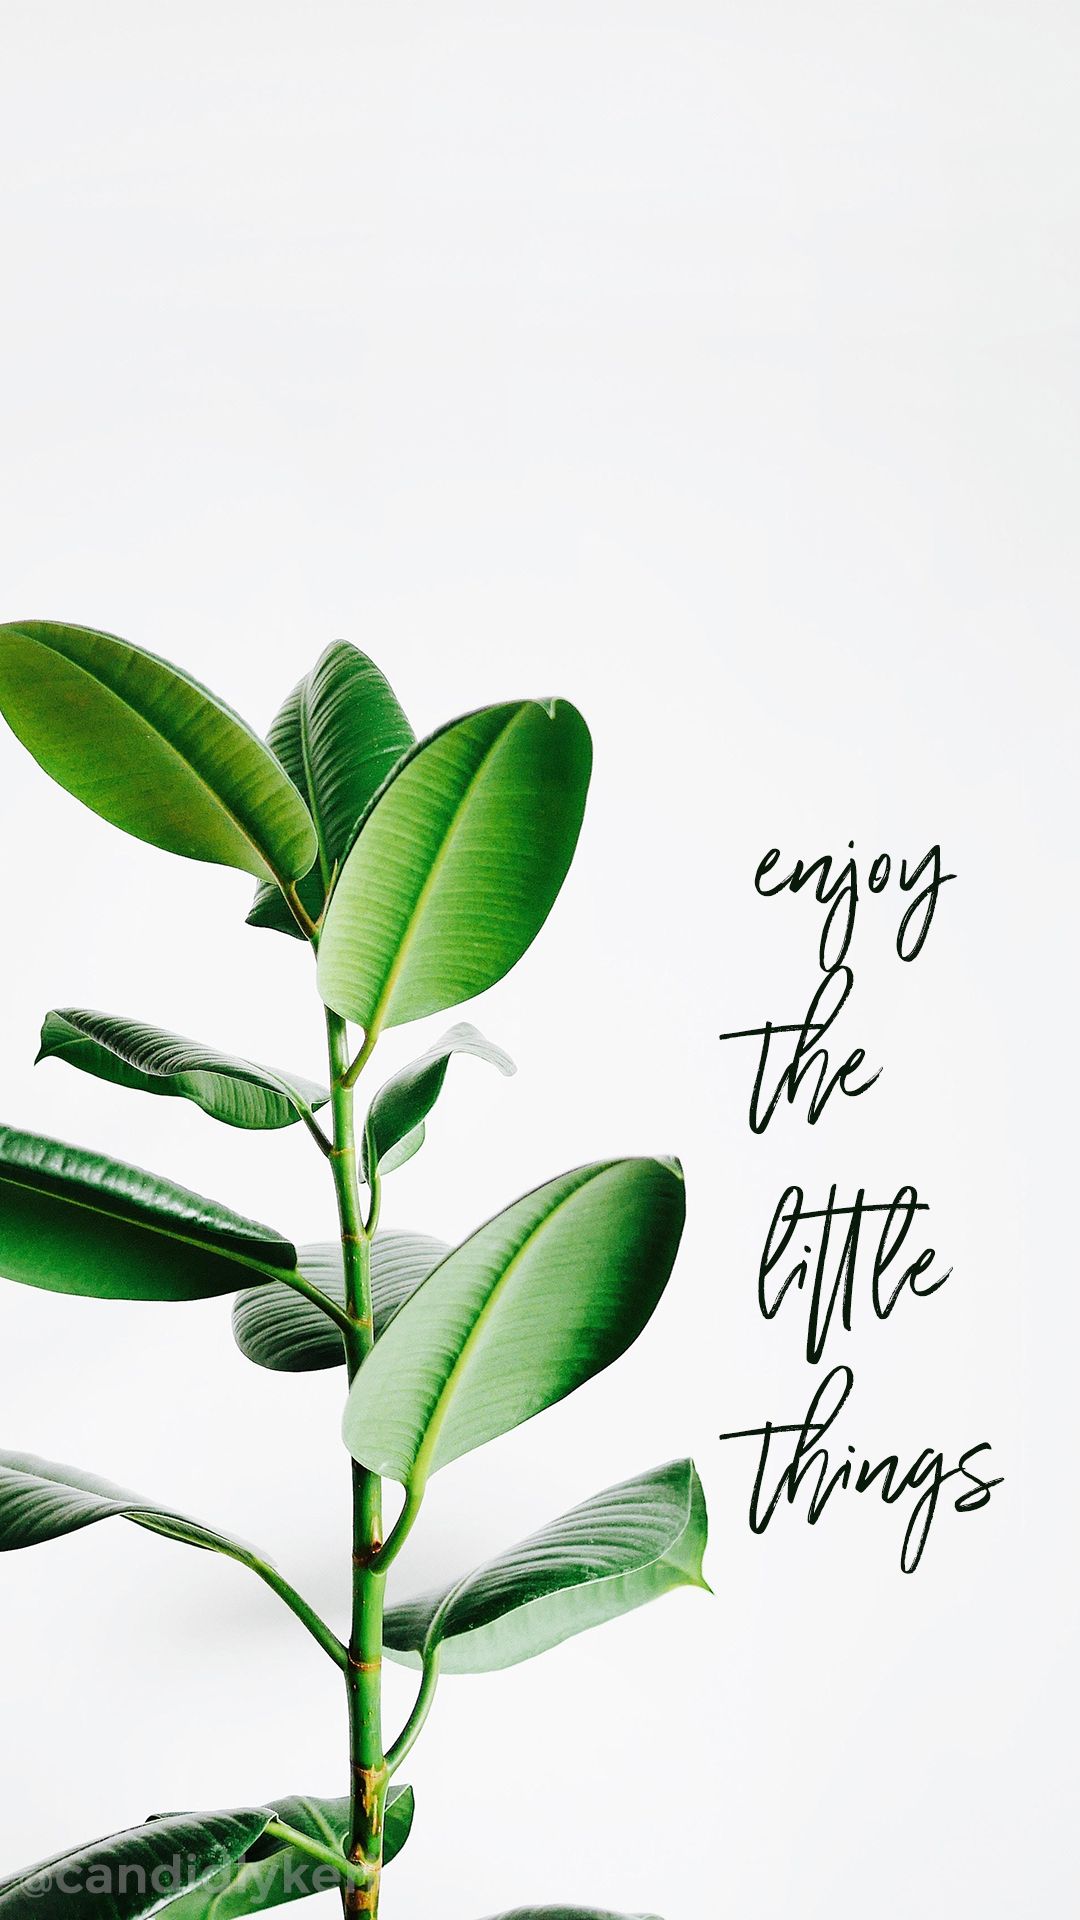 Enjoy the little things, greenry green leaves quote inspirational